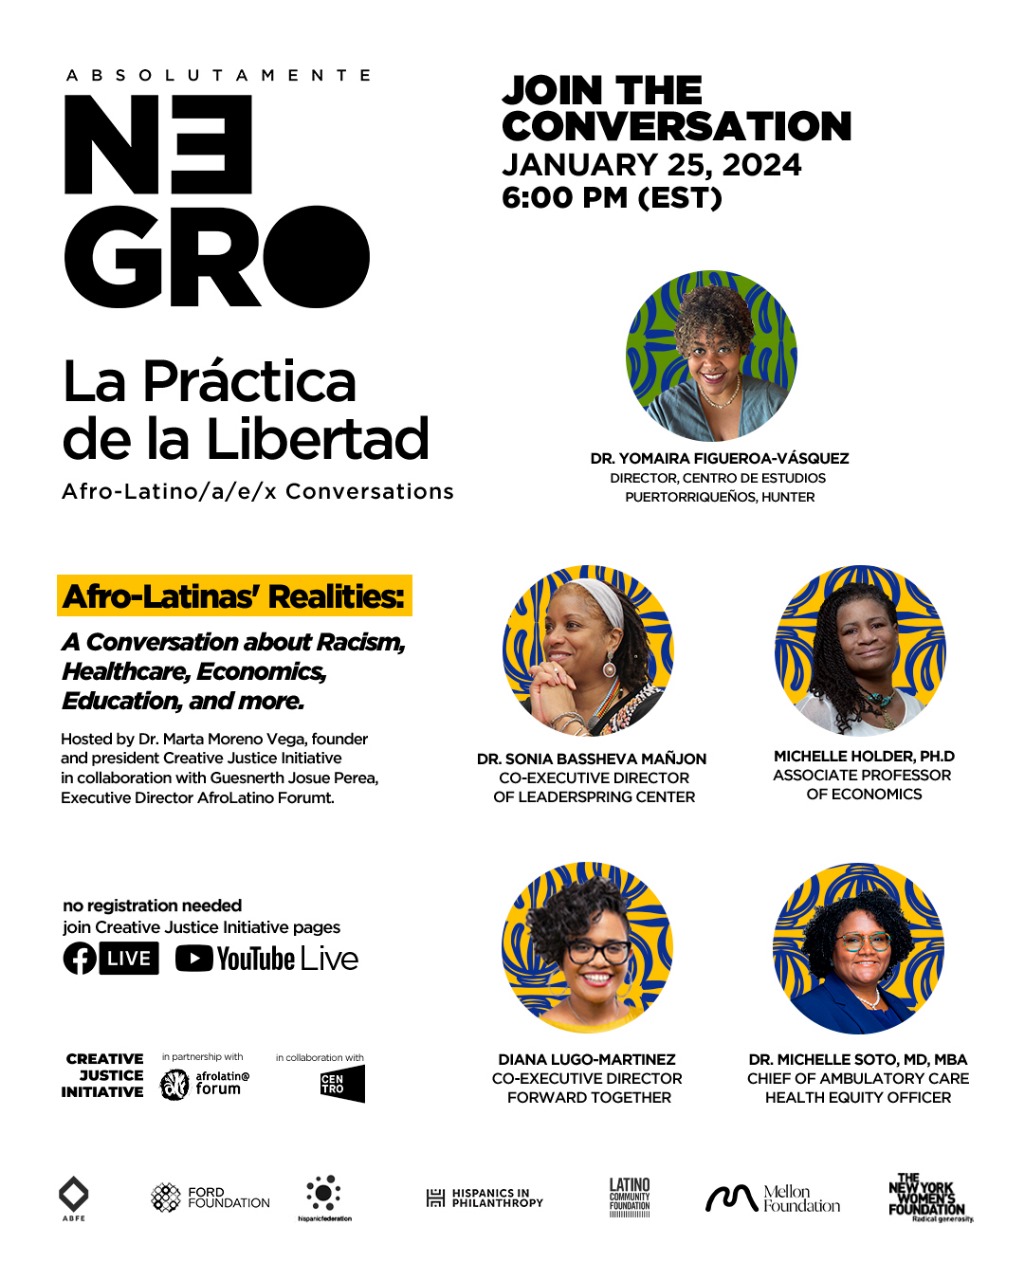 Afro-Latinas’ Realities: A Conversation about Racism, Healthcare, Economics, Education, and more.